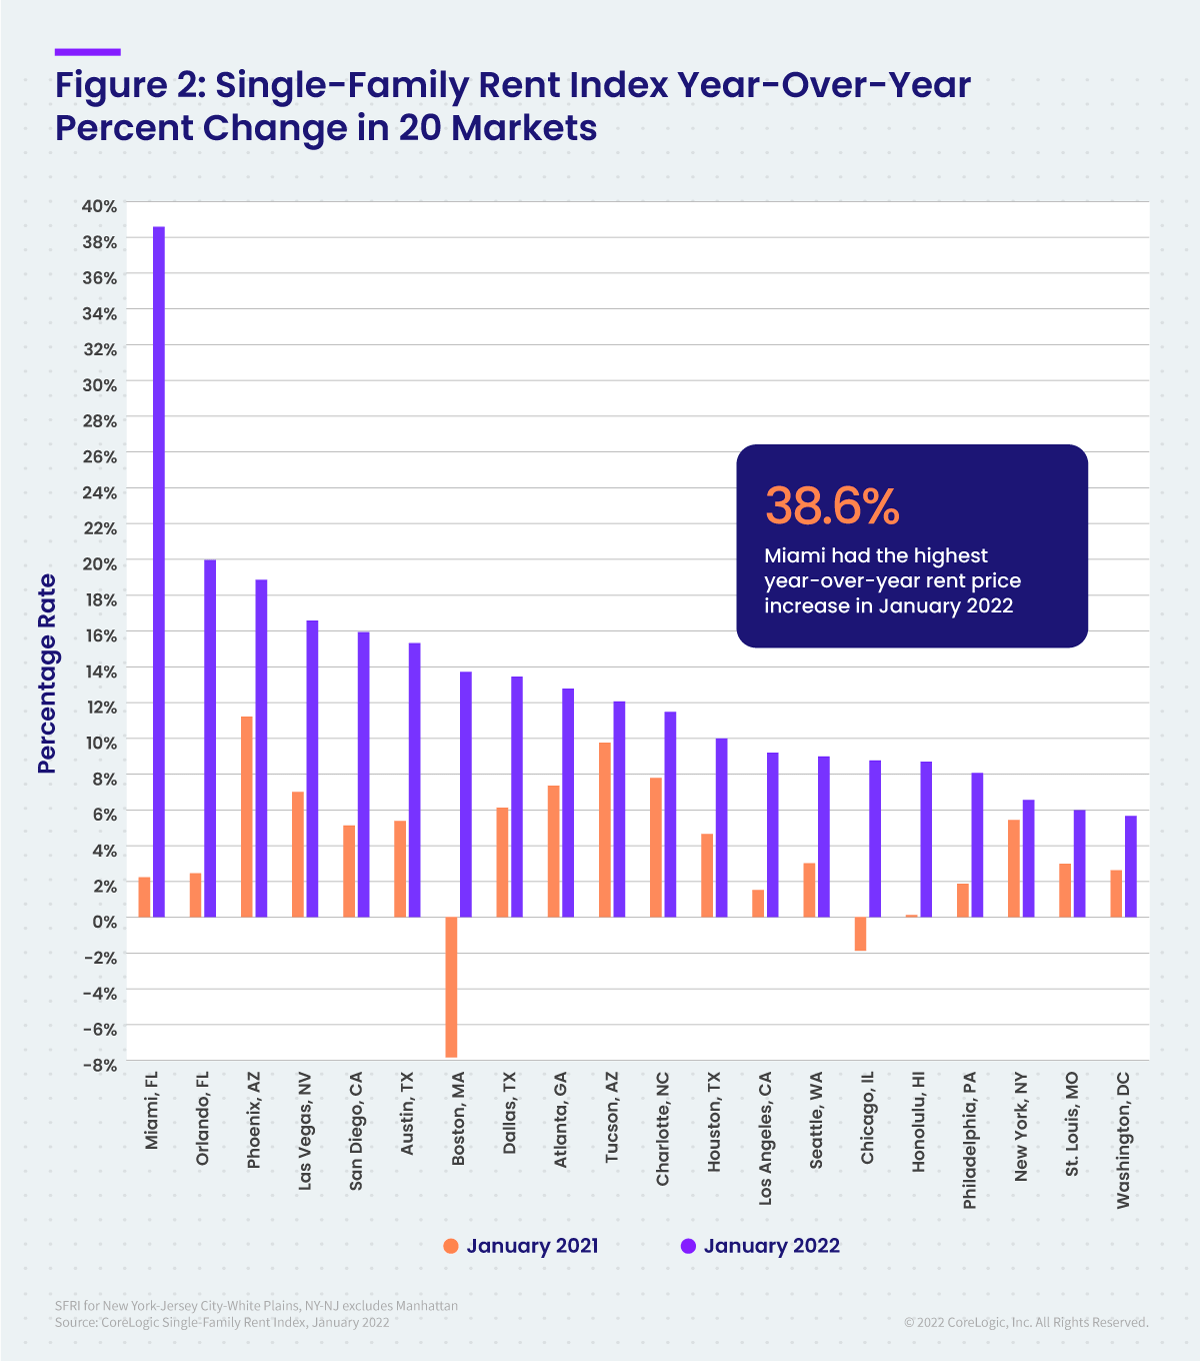 Figure 2: Single-Family Rent Index Year-Over-Year Percent Change in 20 Markets